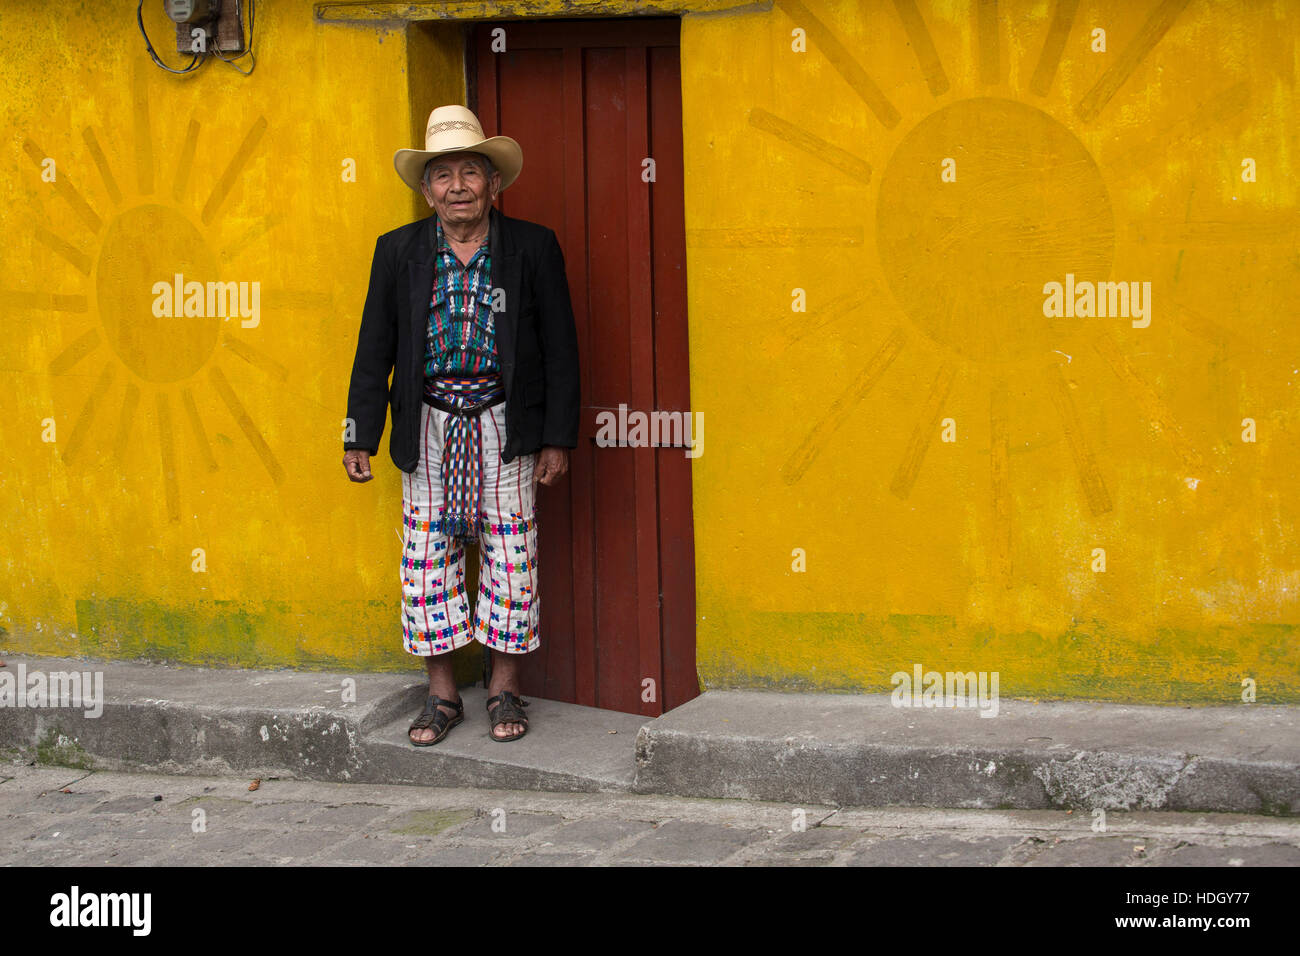 An older Mayan man in traditional dress of San Pedro la Laguna, Guatemala, stands in front of brightly painted house with a red door and yellow sun de Stock Photo